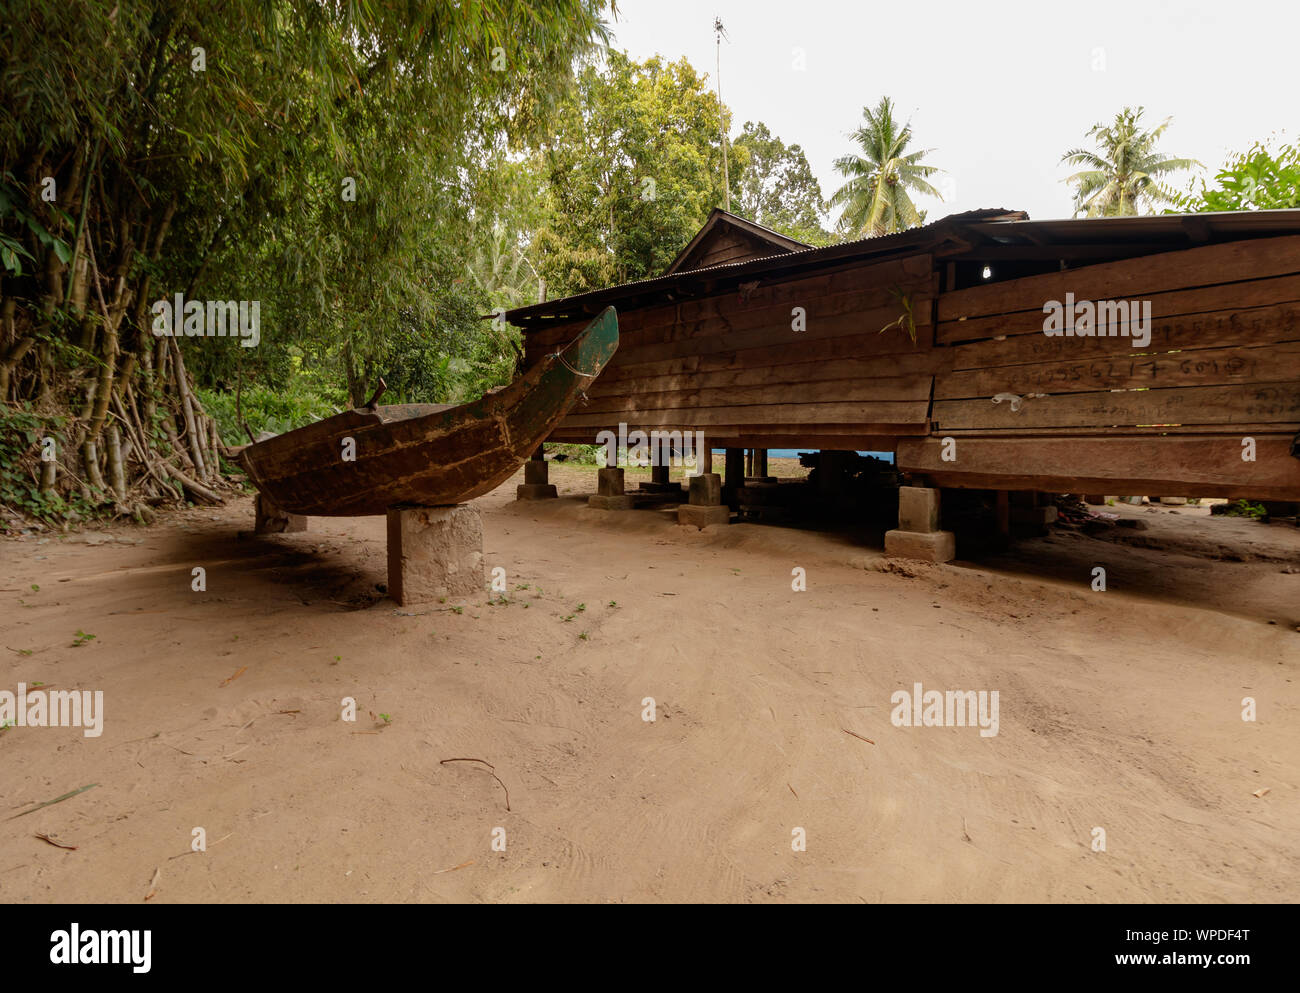 A wooden boat next to a wooden house in Asia. Stock Photo